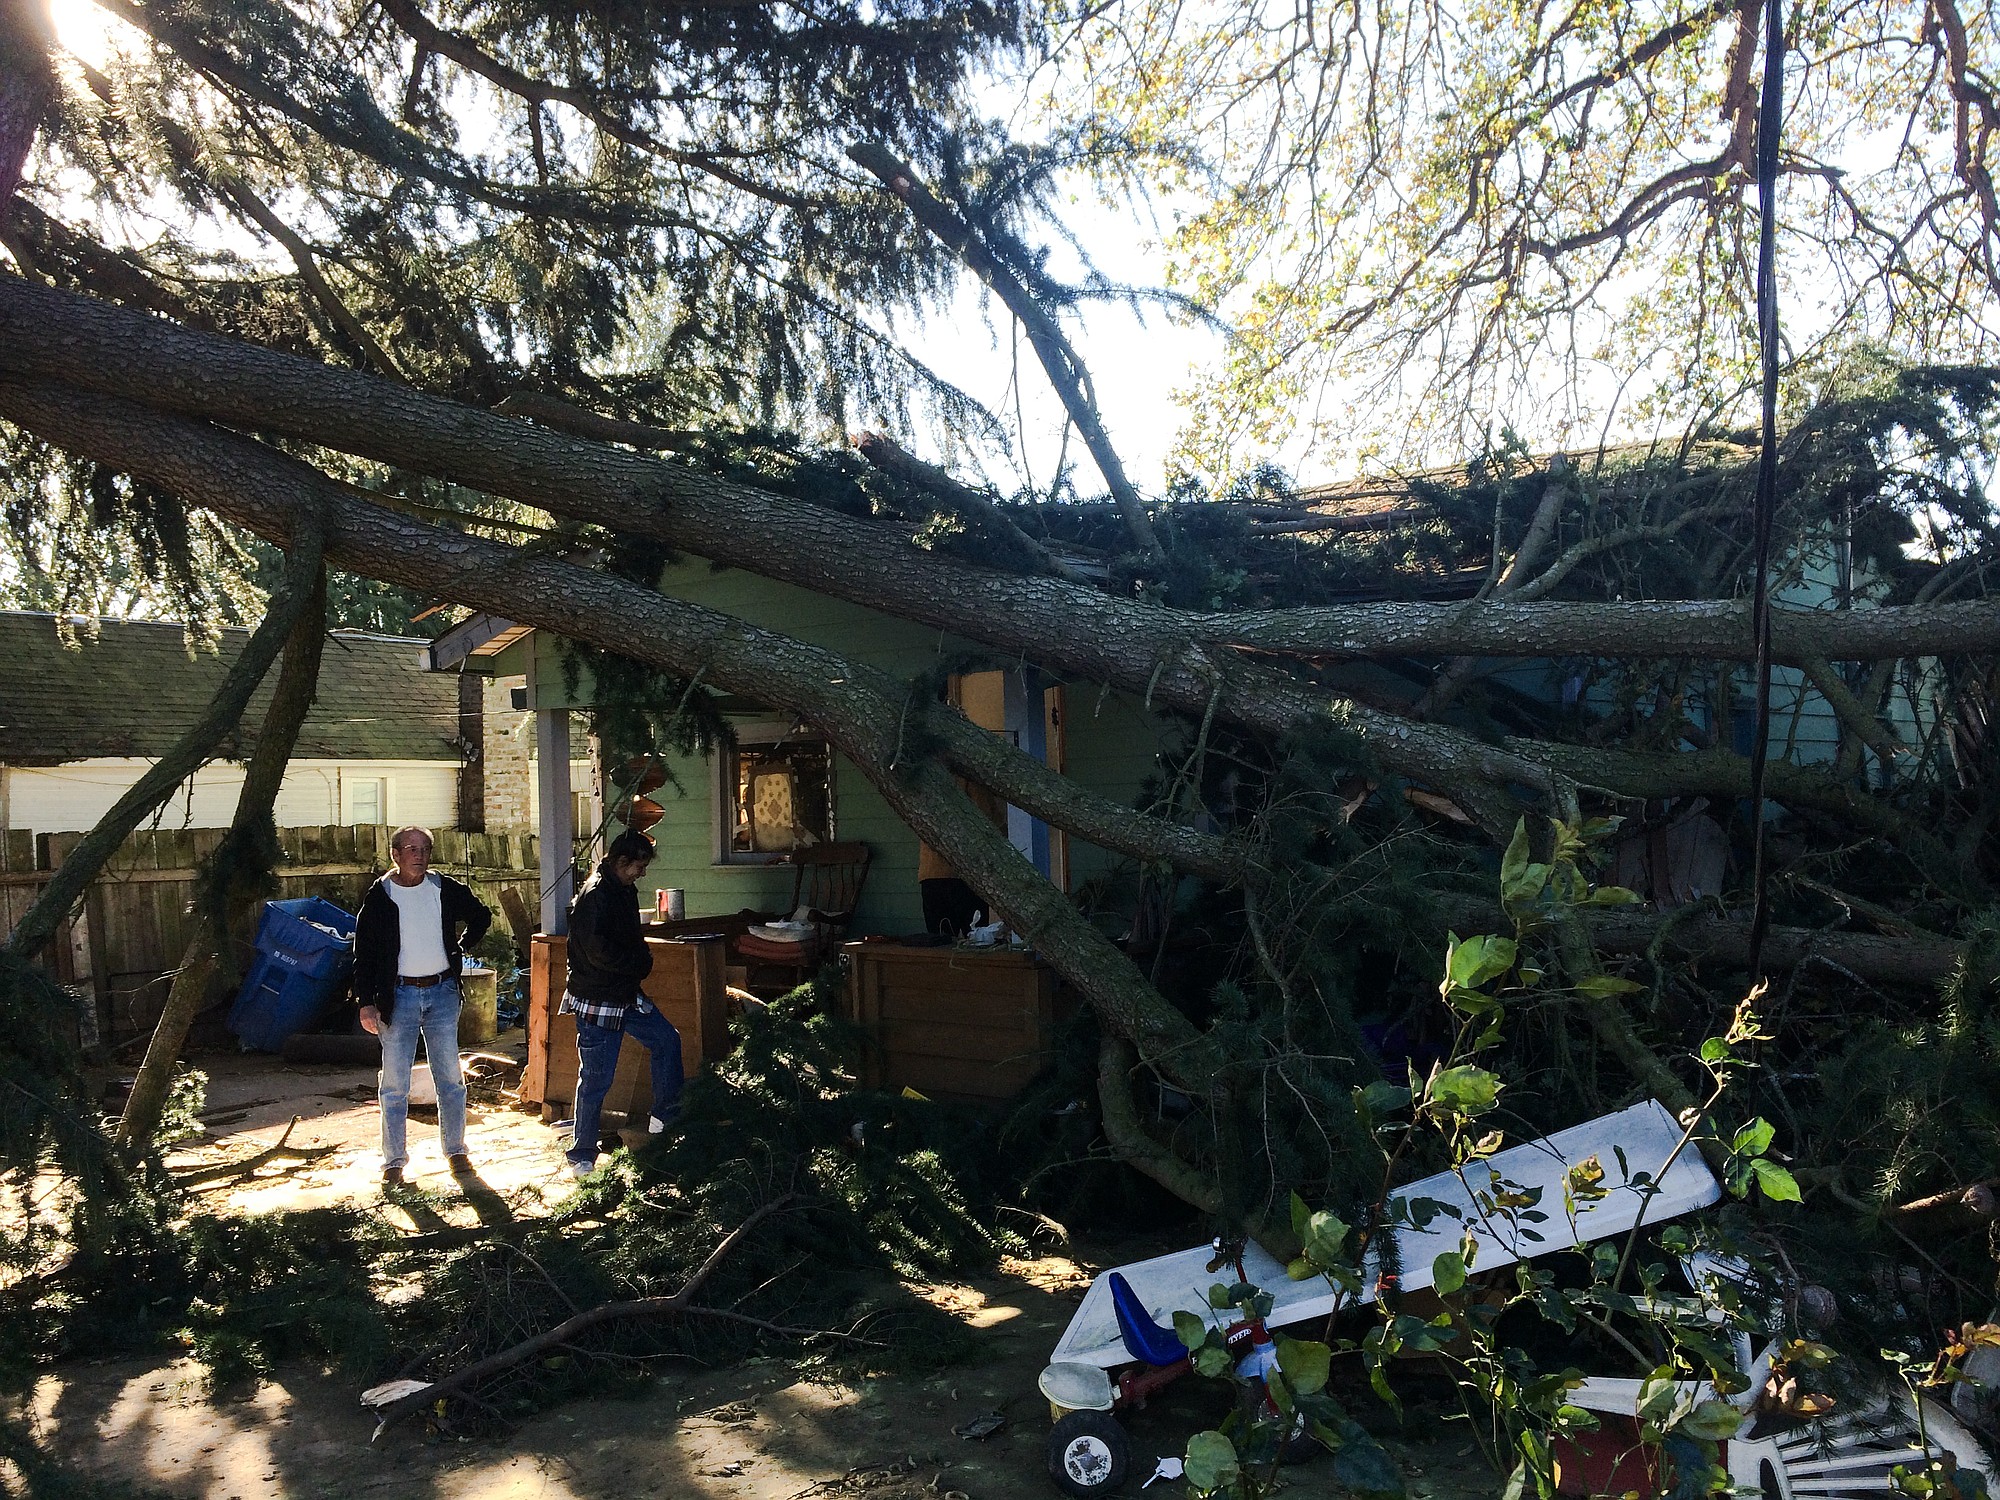 Two large trees fell onto a house in the Vancouver's Hough neighborhood.